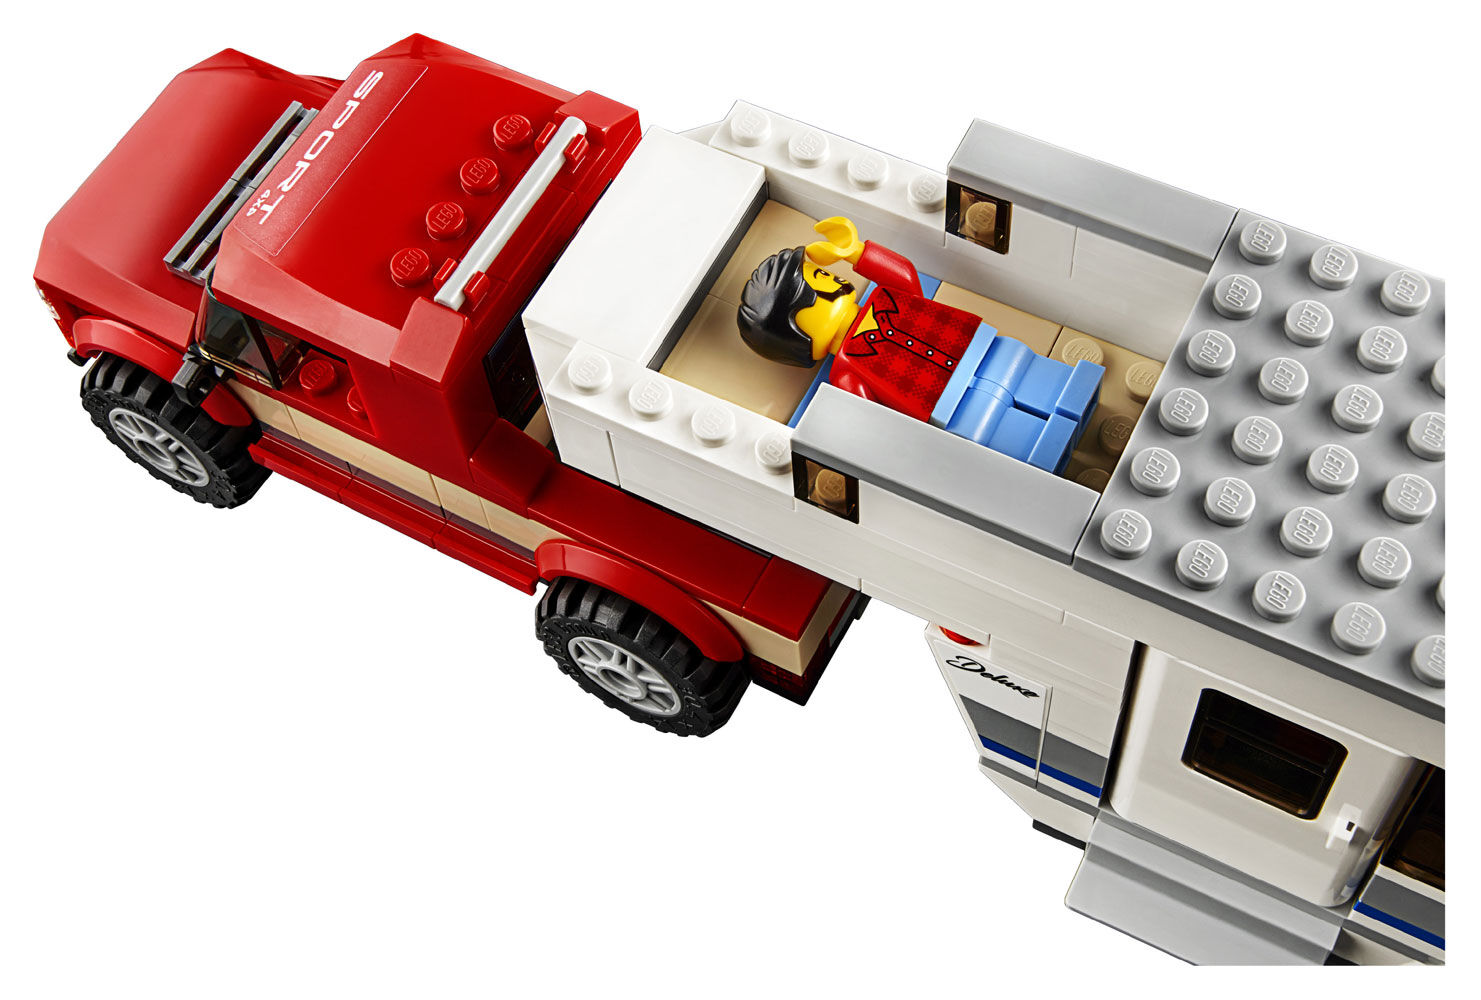 lego truck with camper